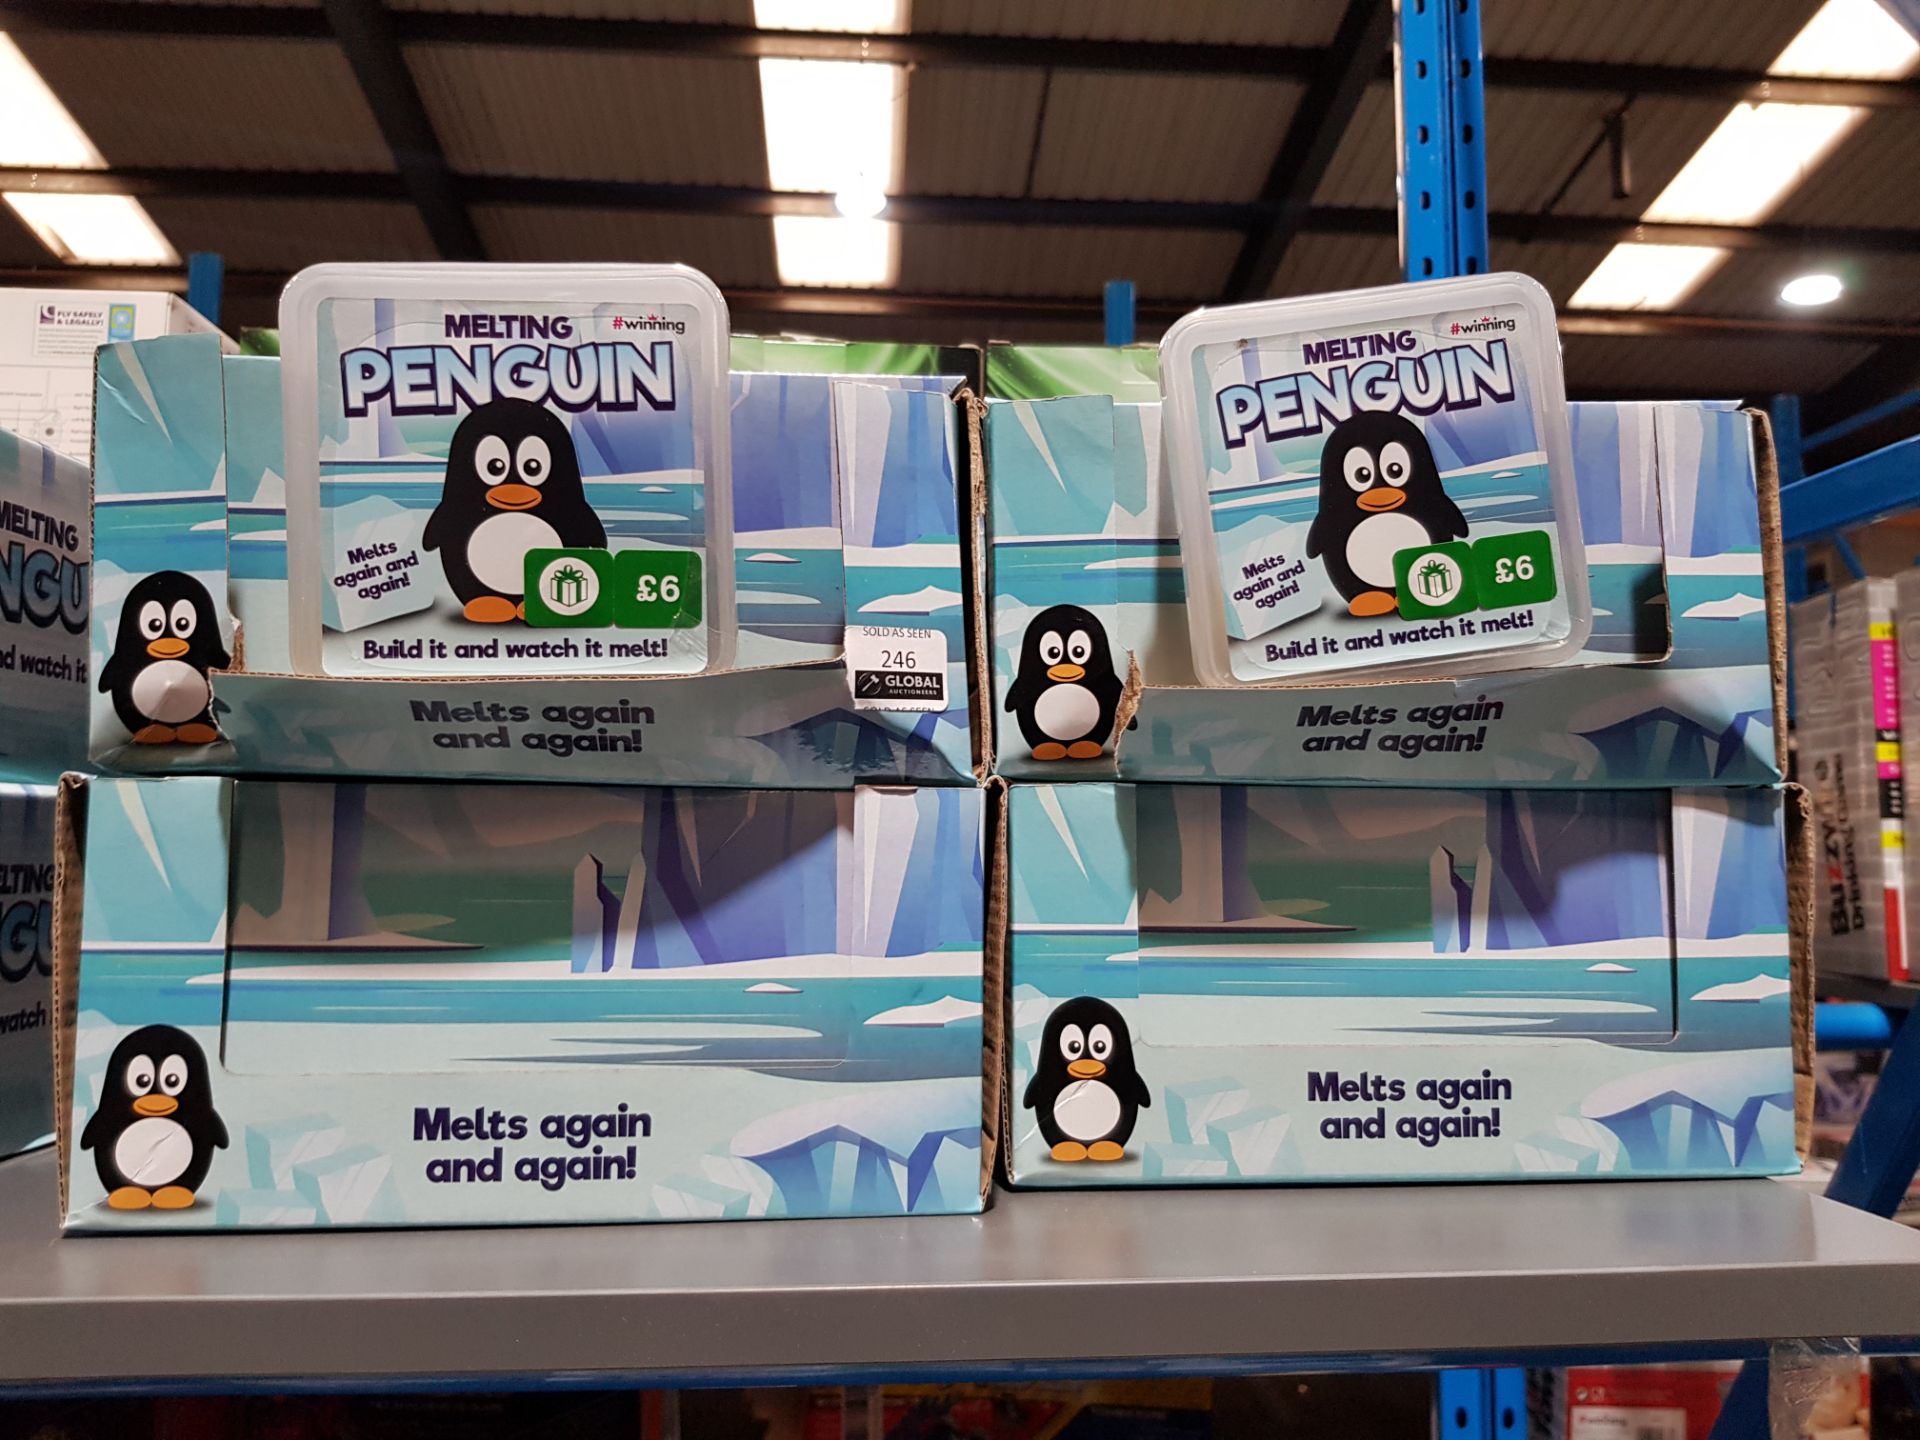 COMBINED RRP £288 - 48 X #WINNING (BOOTS) MELTING PENGUINS (RRP £6 EACH) ** AS NEW / SEALED UNITS**